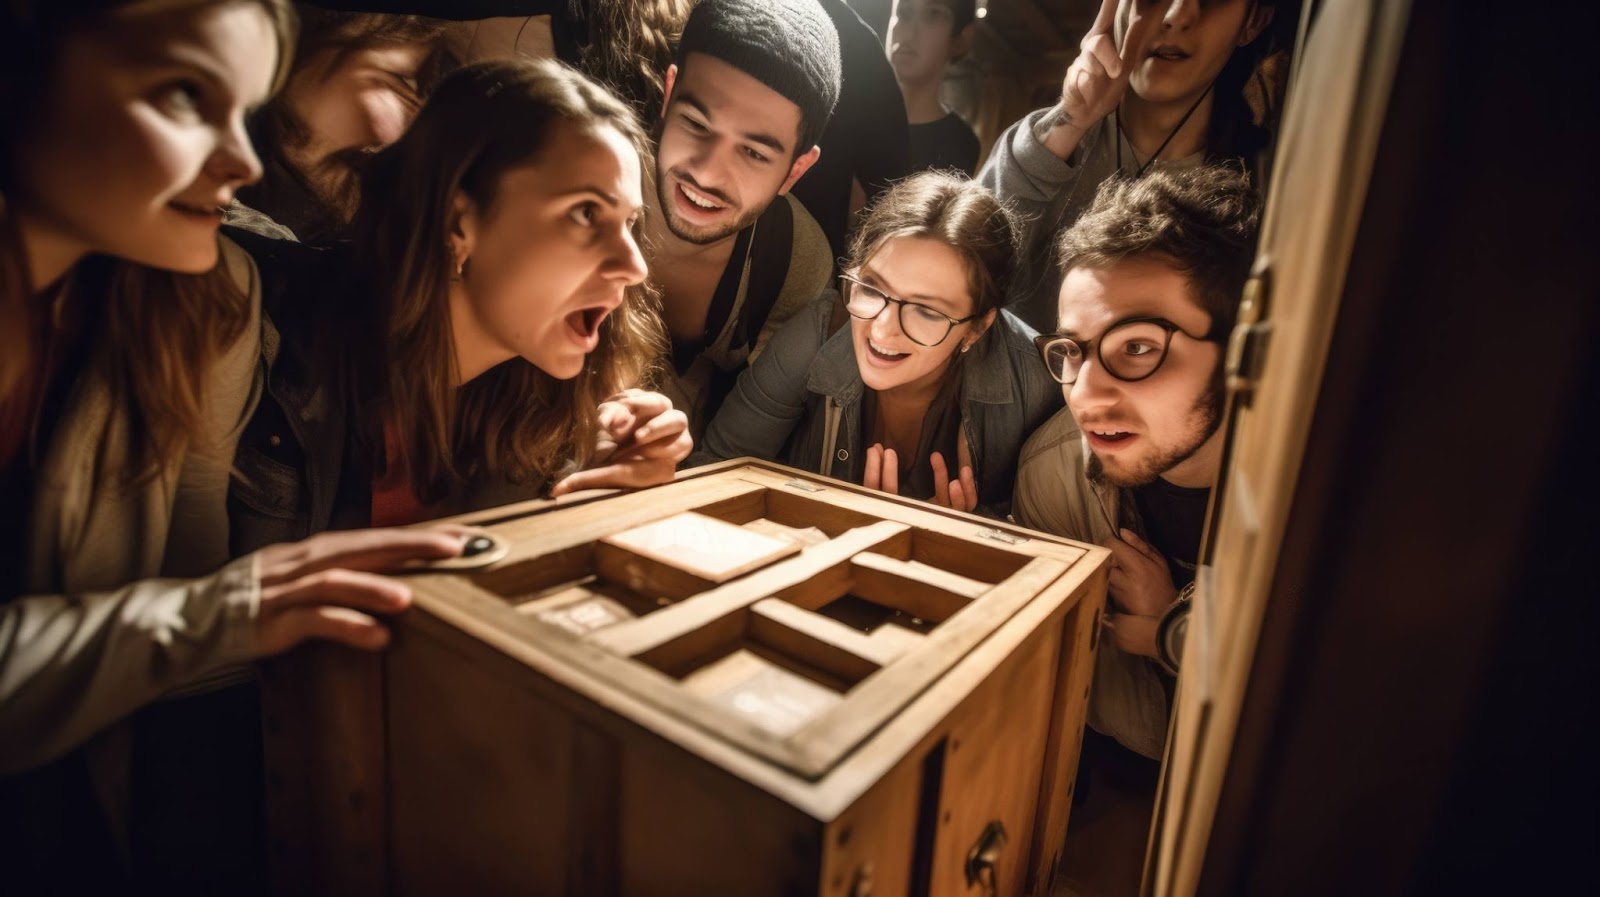 A group of friends sharing a moment of excitement and discovery as they embark on a treasure hunt or participate in an escape room activity.